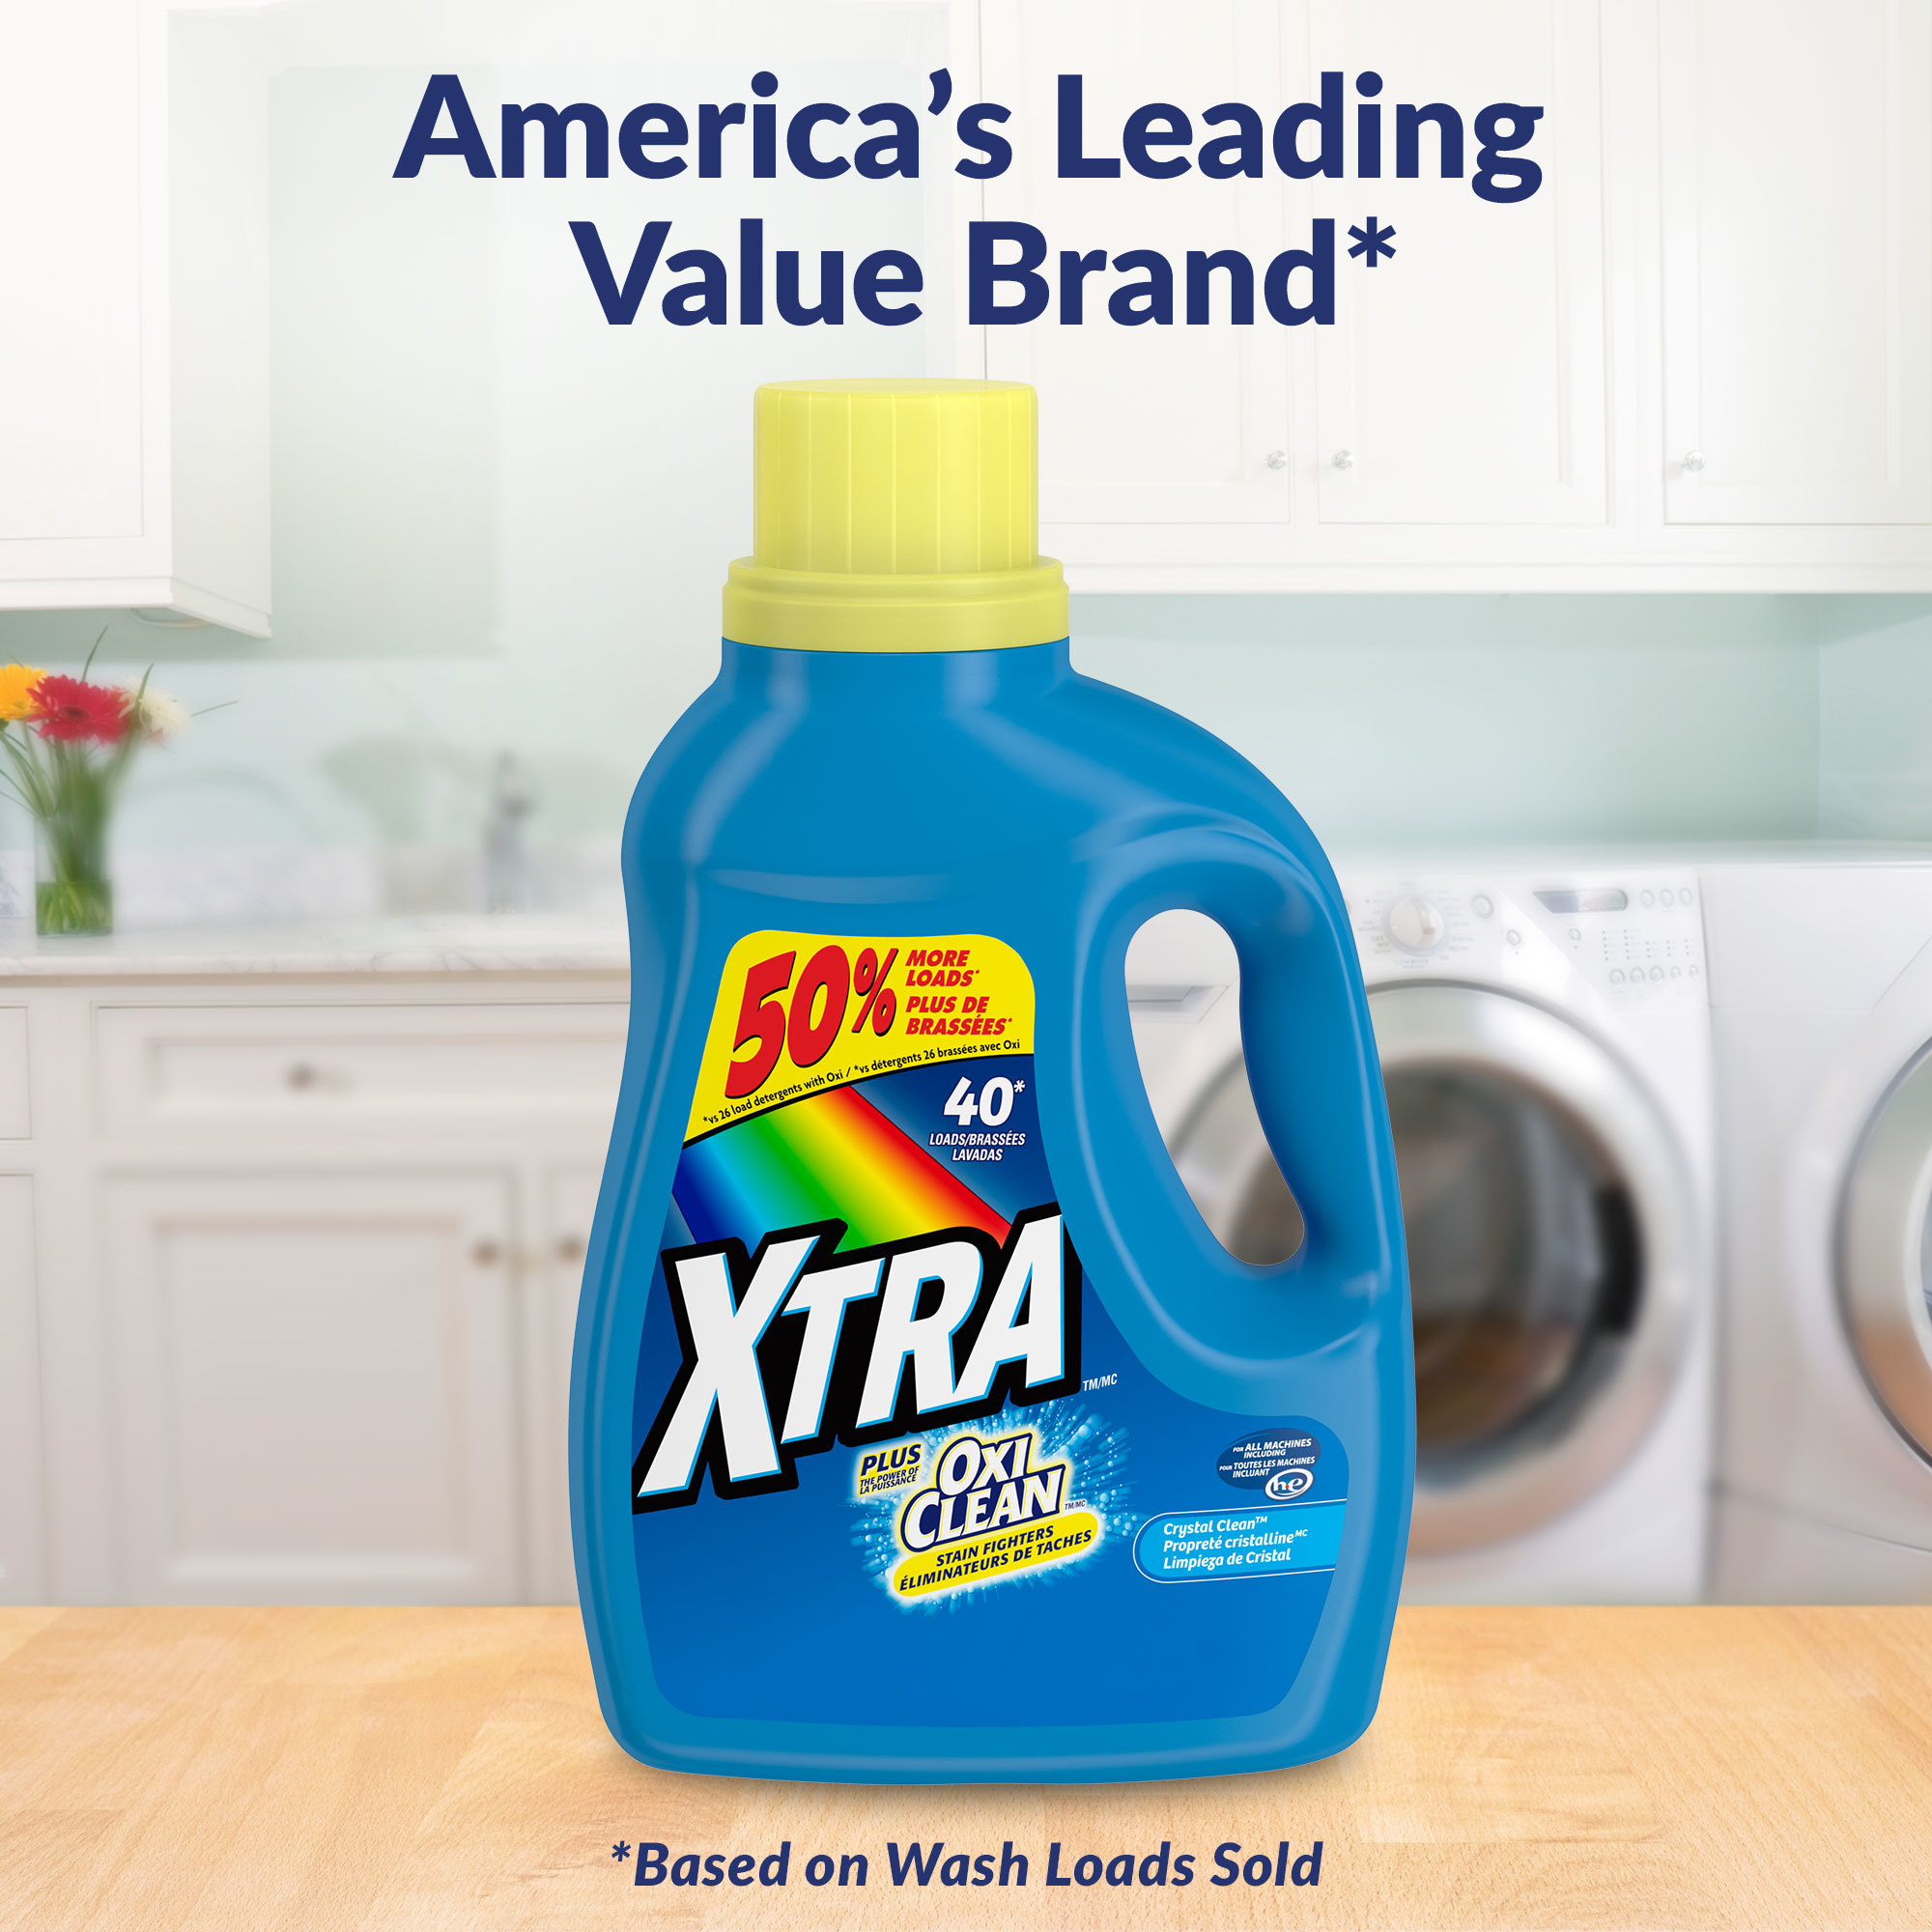 Xtra Plus OxiClean Liquid Laundry Detergent, Crystal Clean, 75oz - image 4 of 9